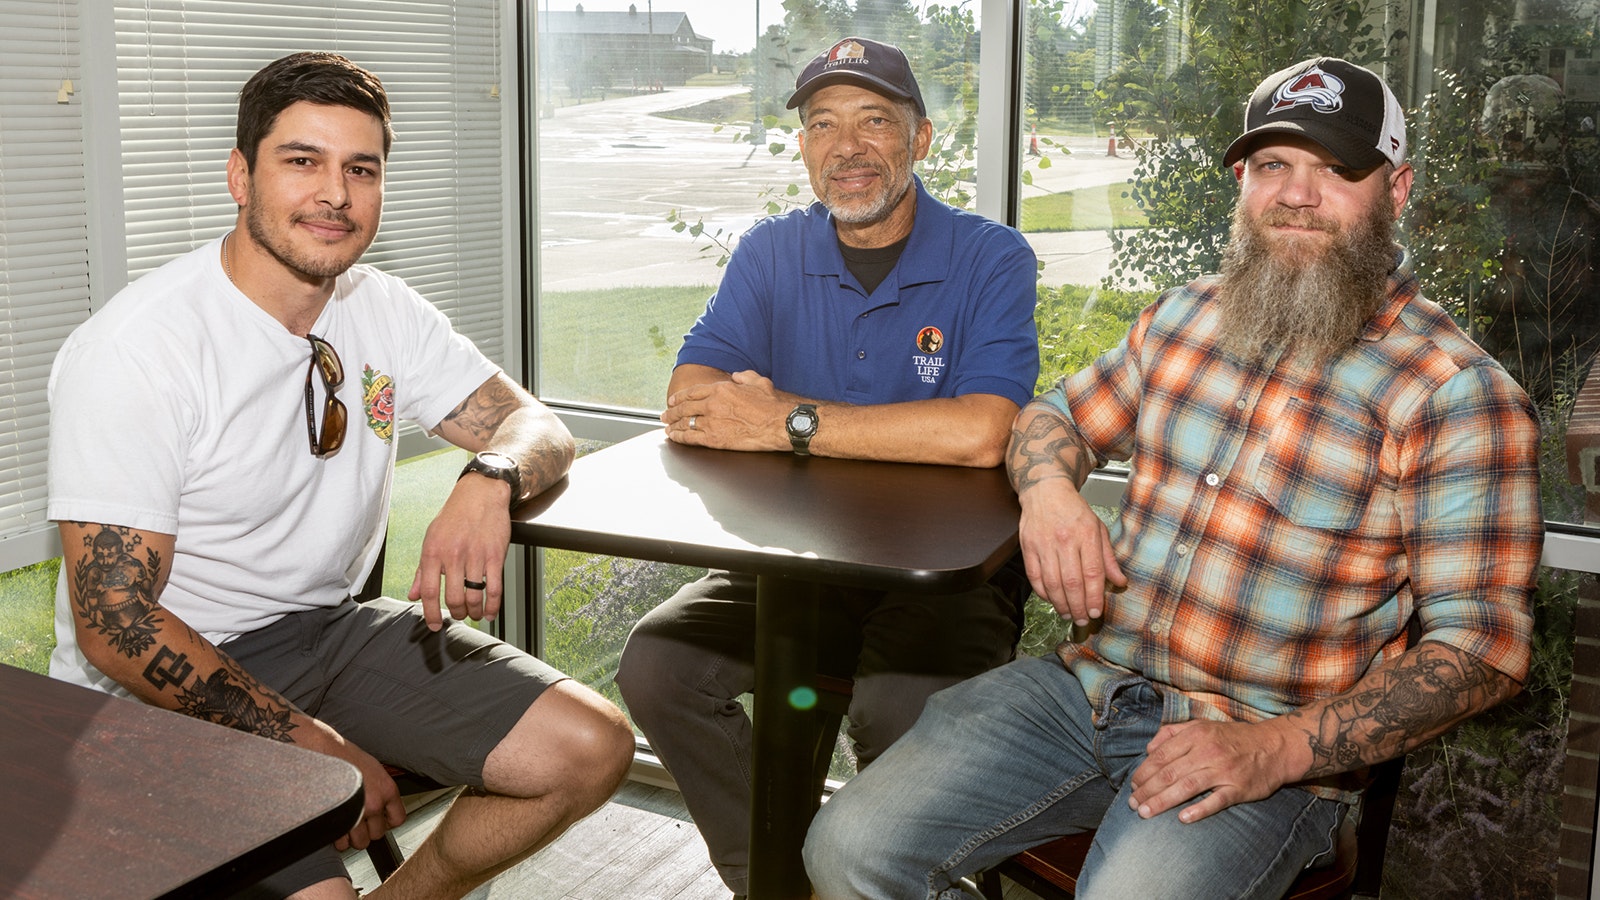 Tom Hutchings of Cheyenne, center, recently met Matt Watts, left, and John Ysebaert, who stopped and saved Hutching's life after he suffered from cardiac arrest while driving on Interstate 25.